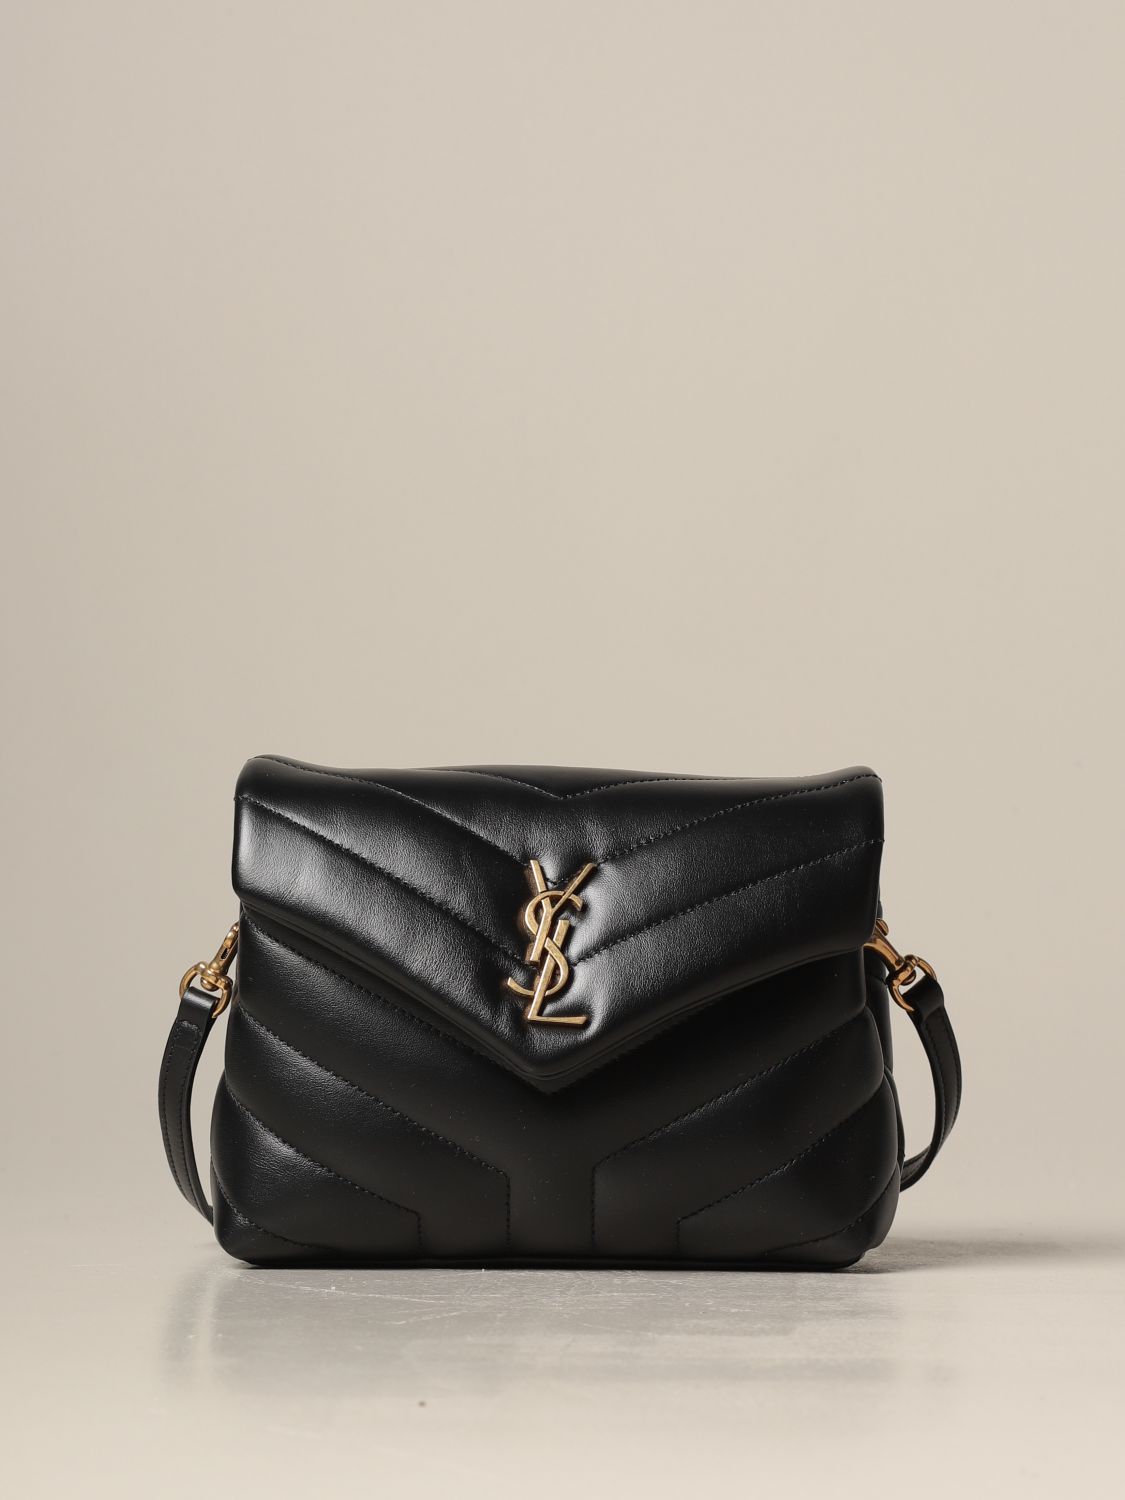 Saint Laurent Lou Mini Bag in Quilted Shiny Leather - Black - Women